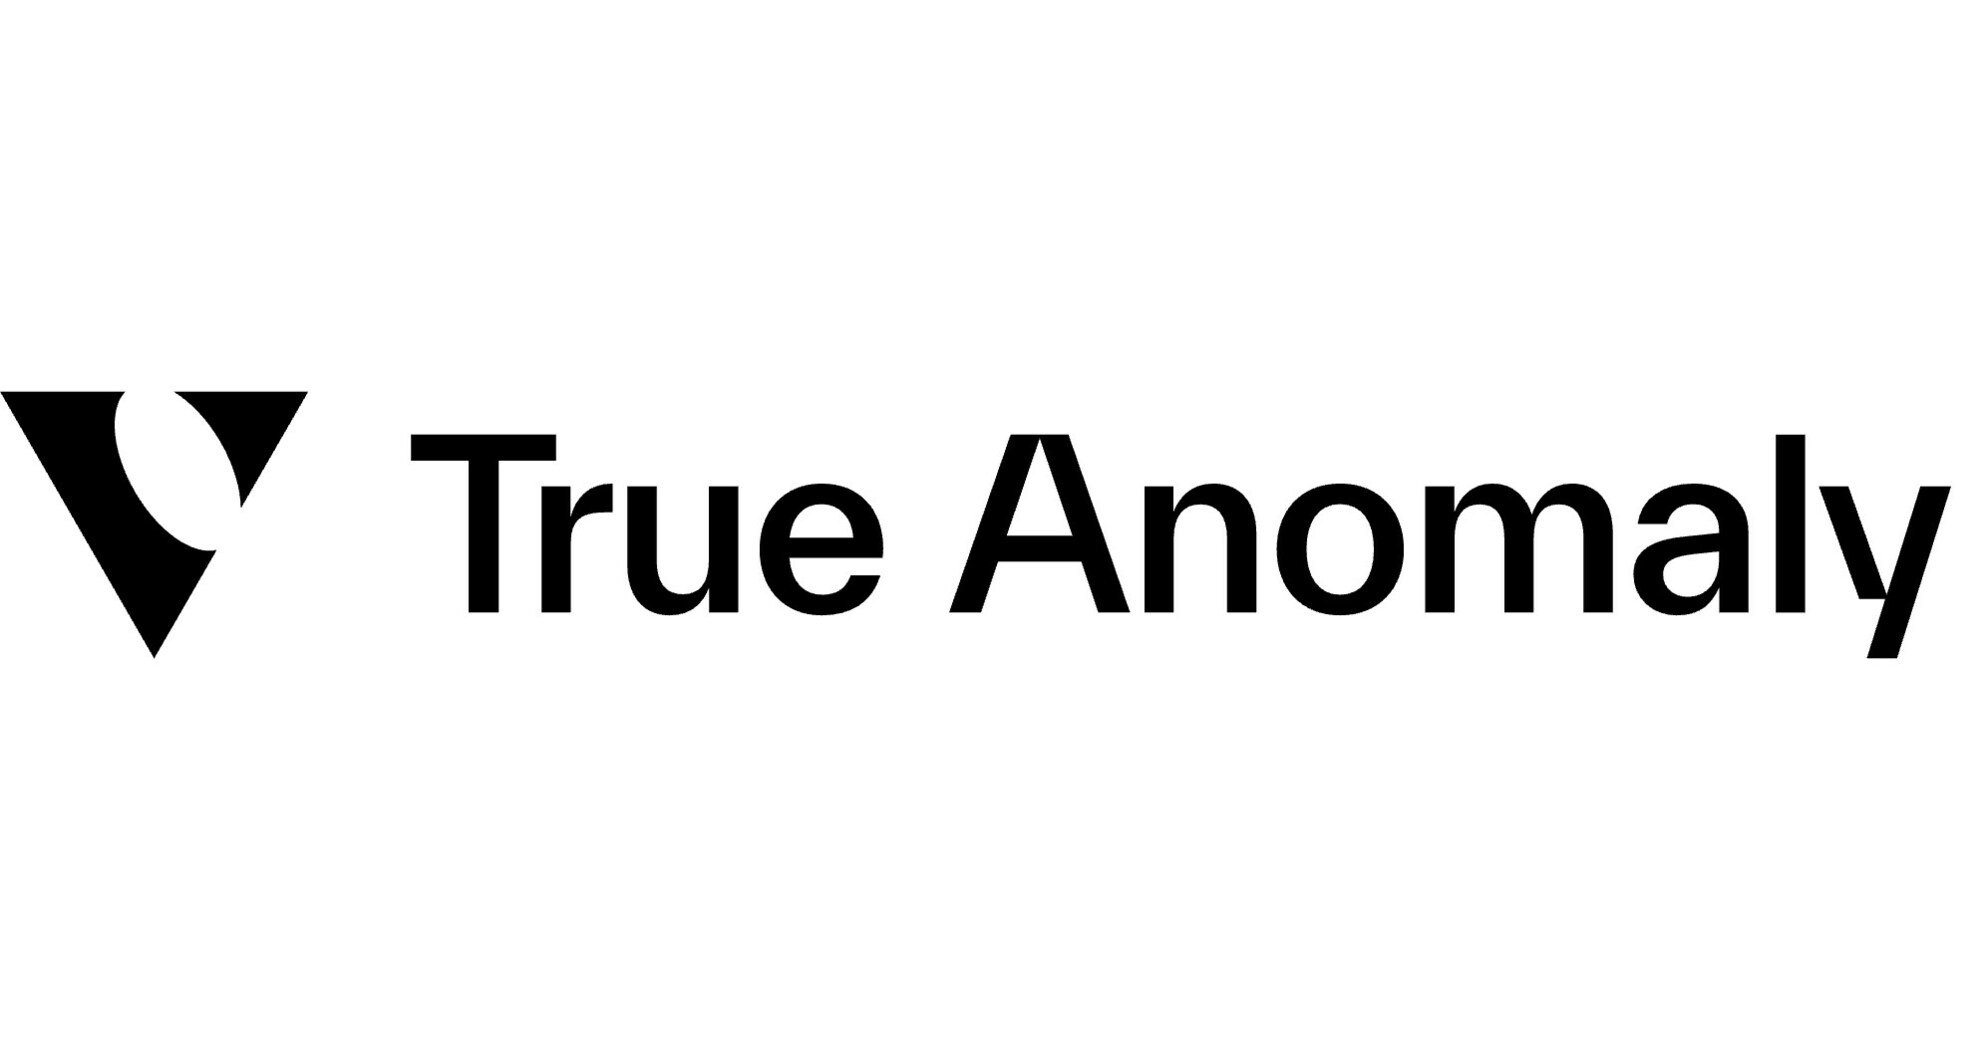 True Anomaly appoints Diana Lovati as its first-ever Chief Info Safety Officer